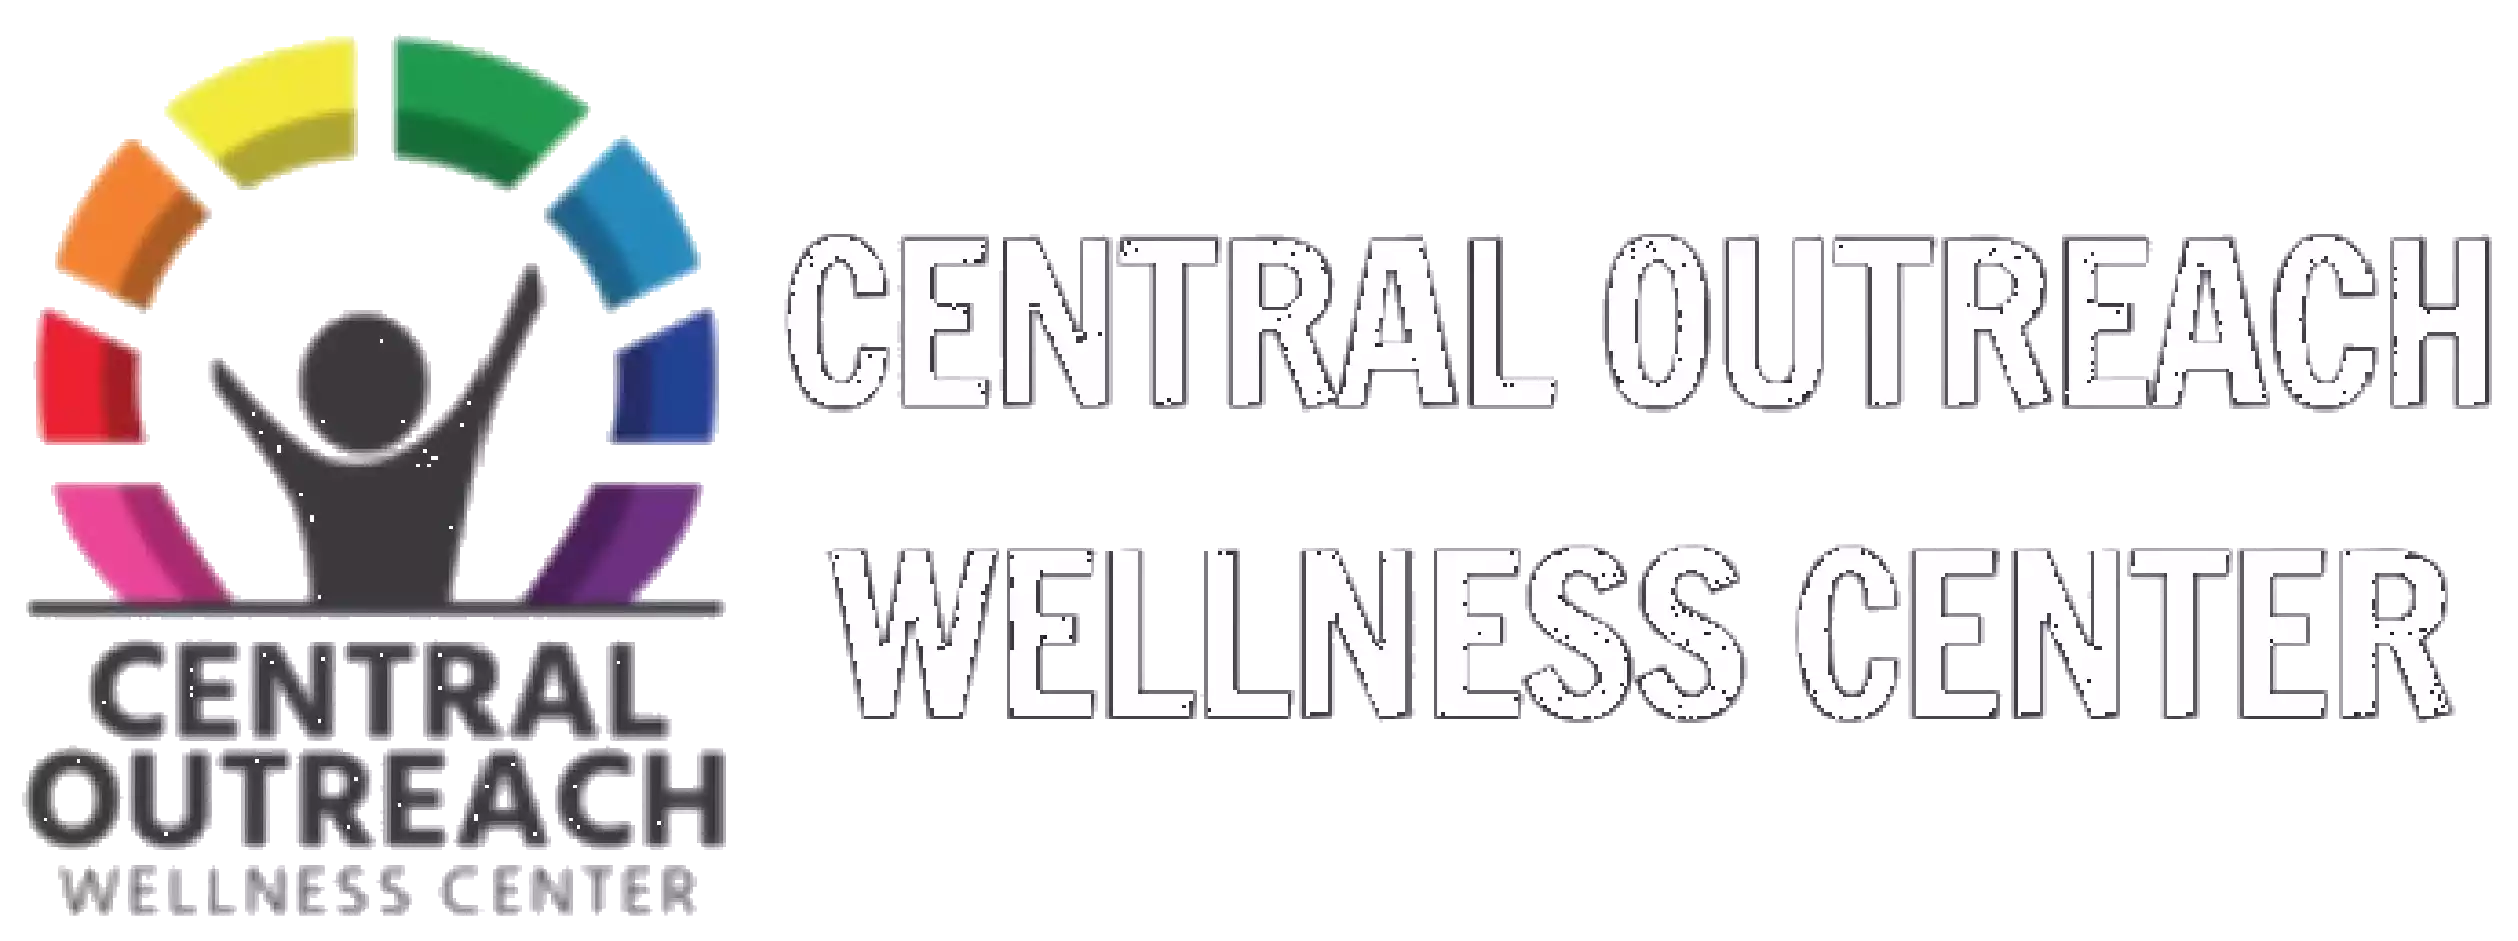 Central Outreach Wellness Centers - Mobile Testing